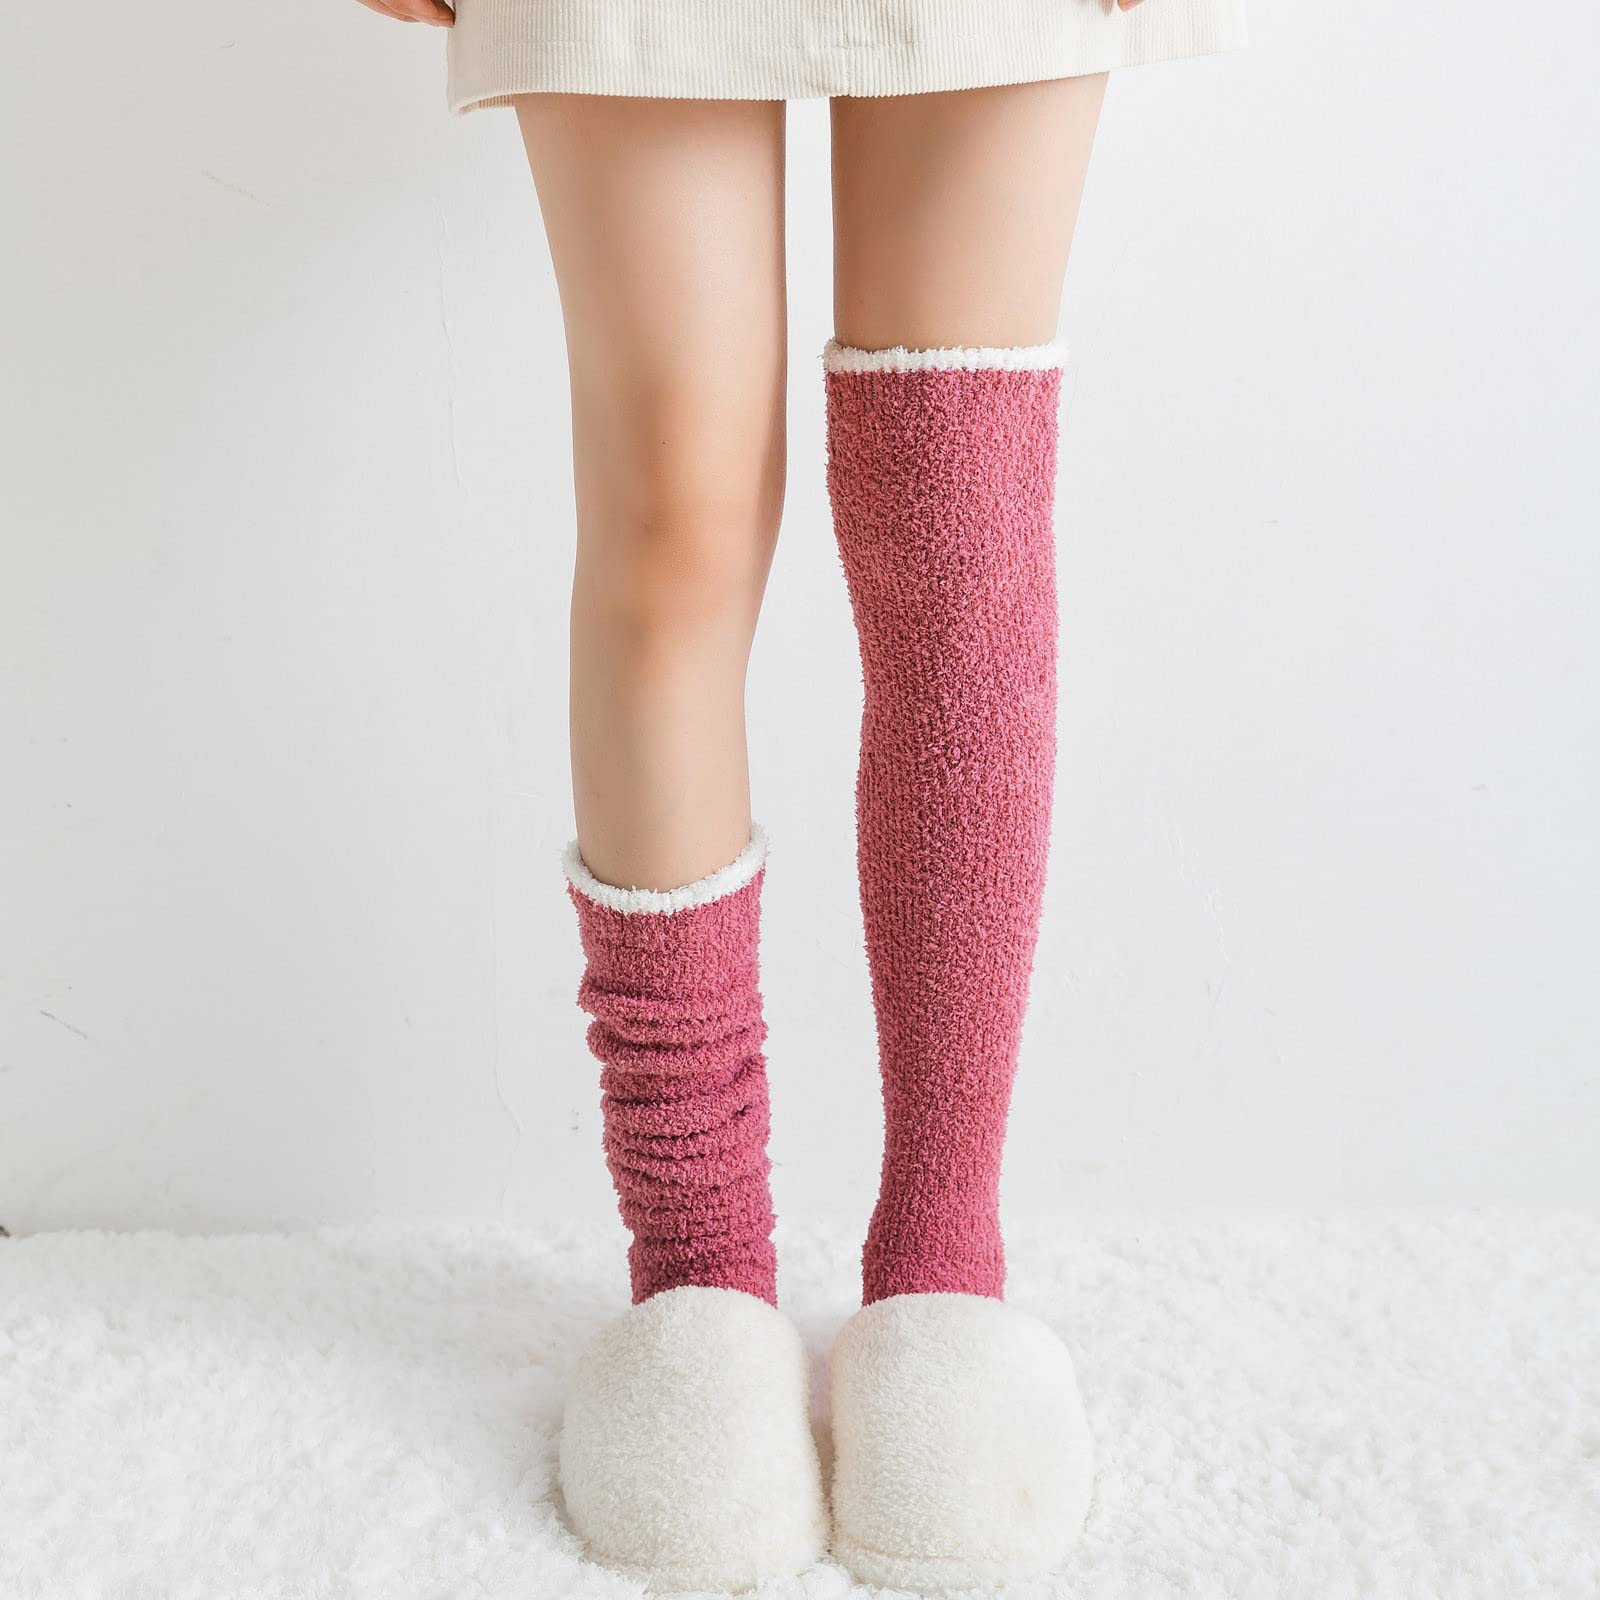 ayodele peter recommends Fuzzy Socks Knee High